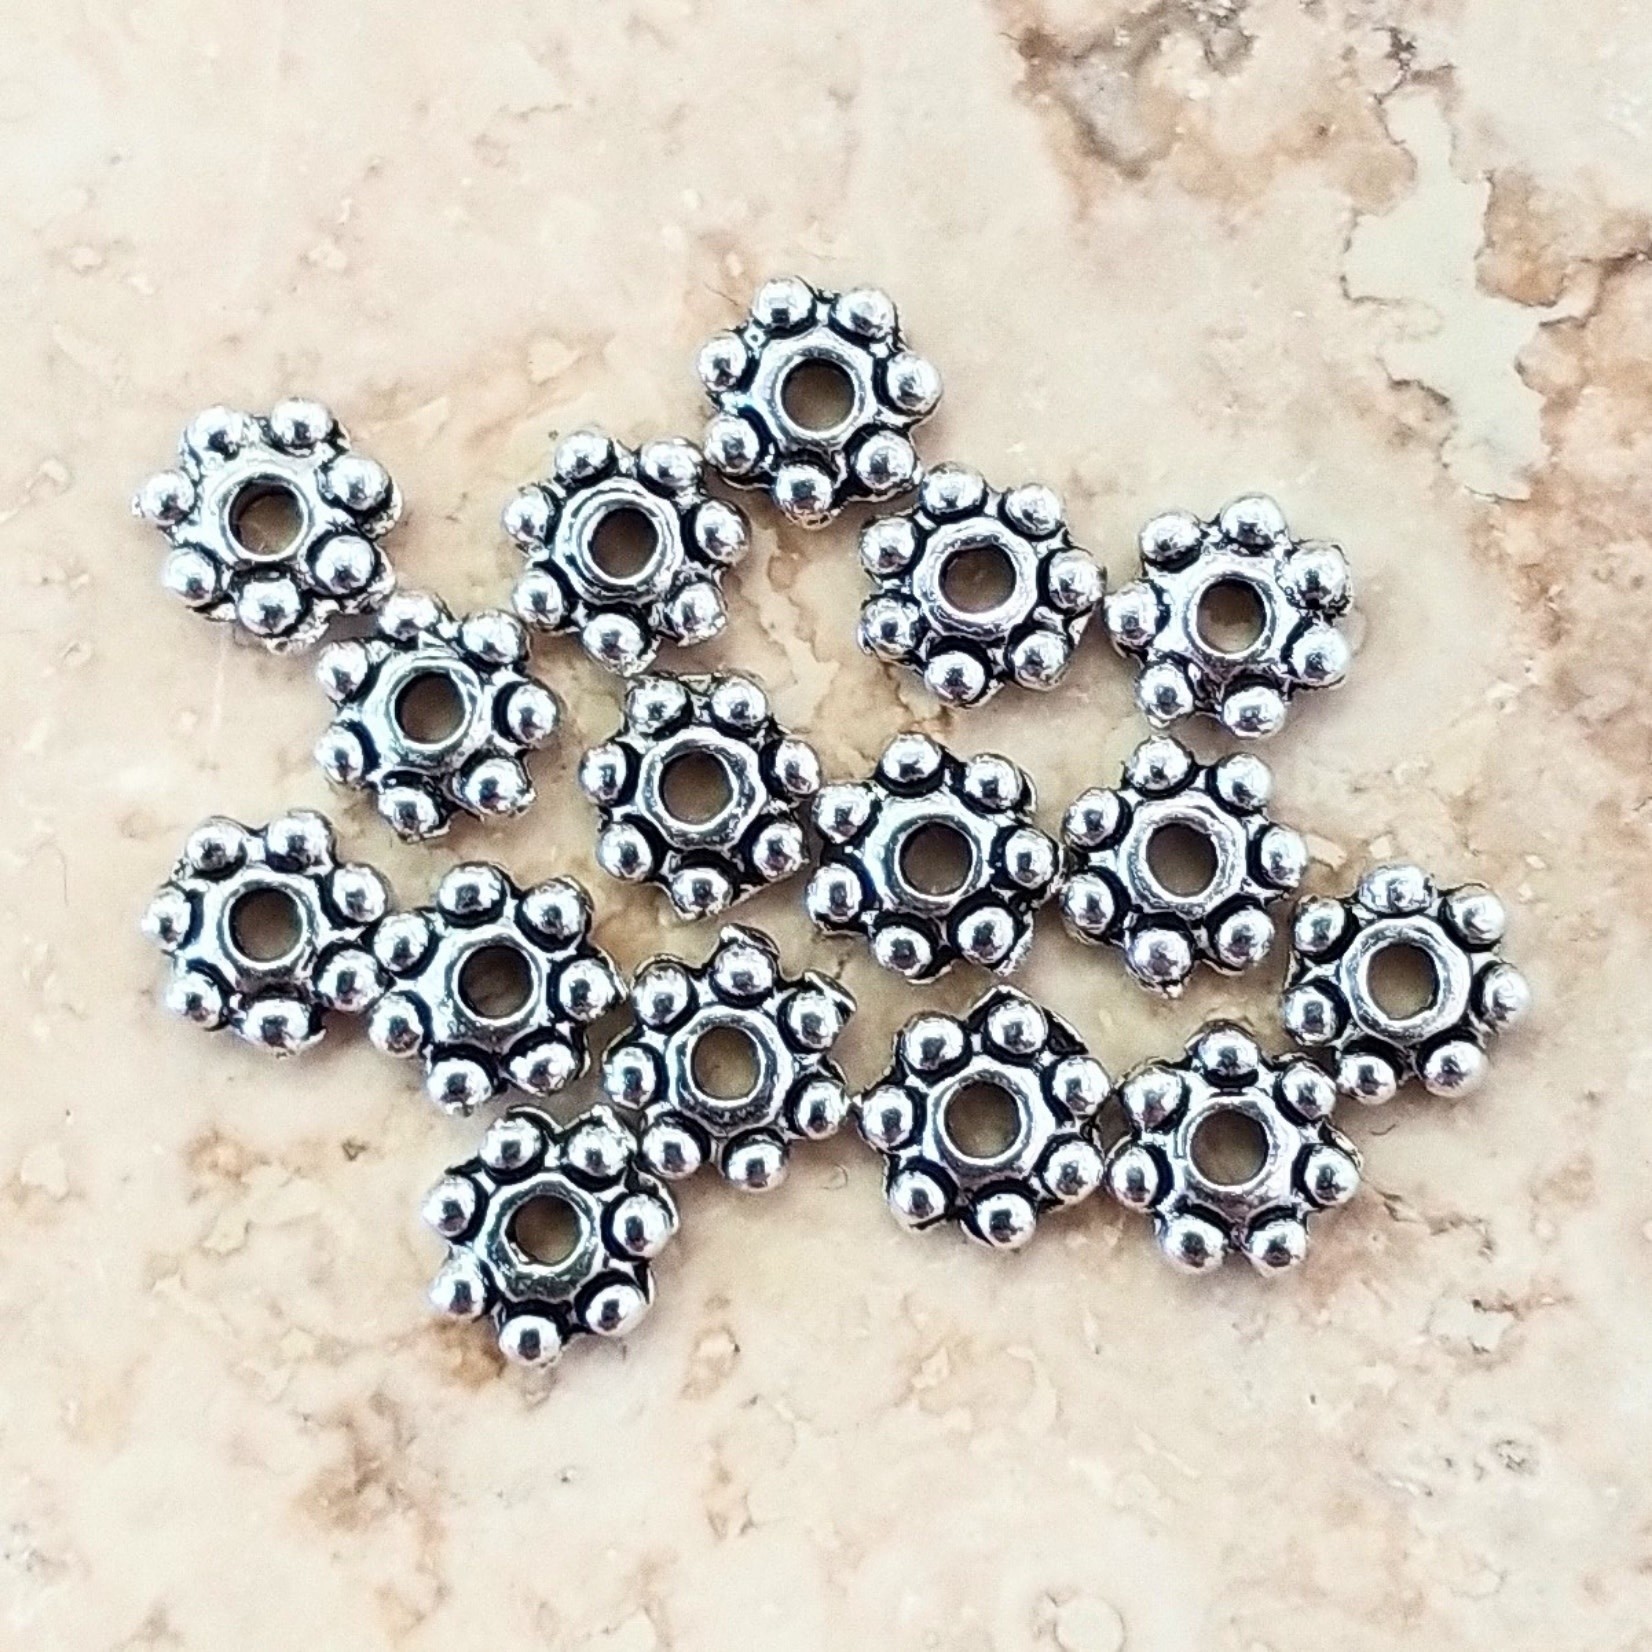 Pewter 4mm Daisy Spacers - 20 Pieces